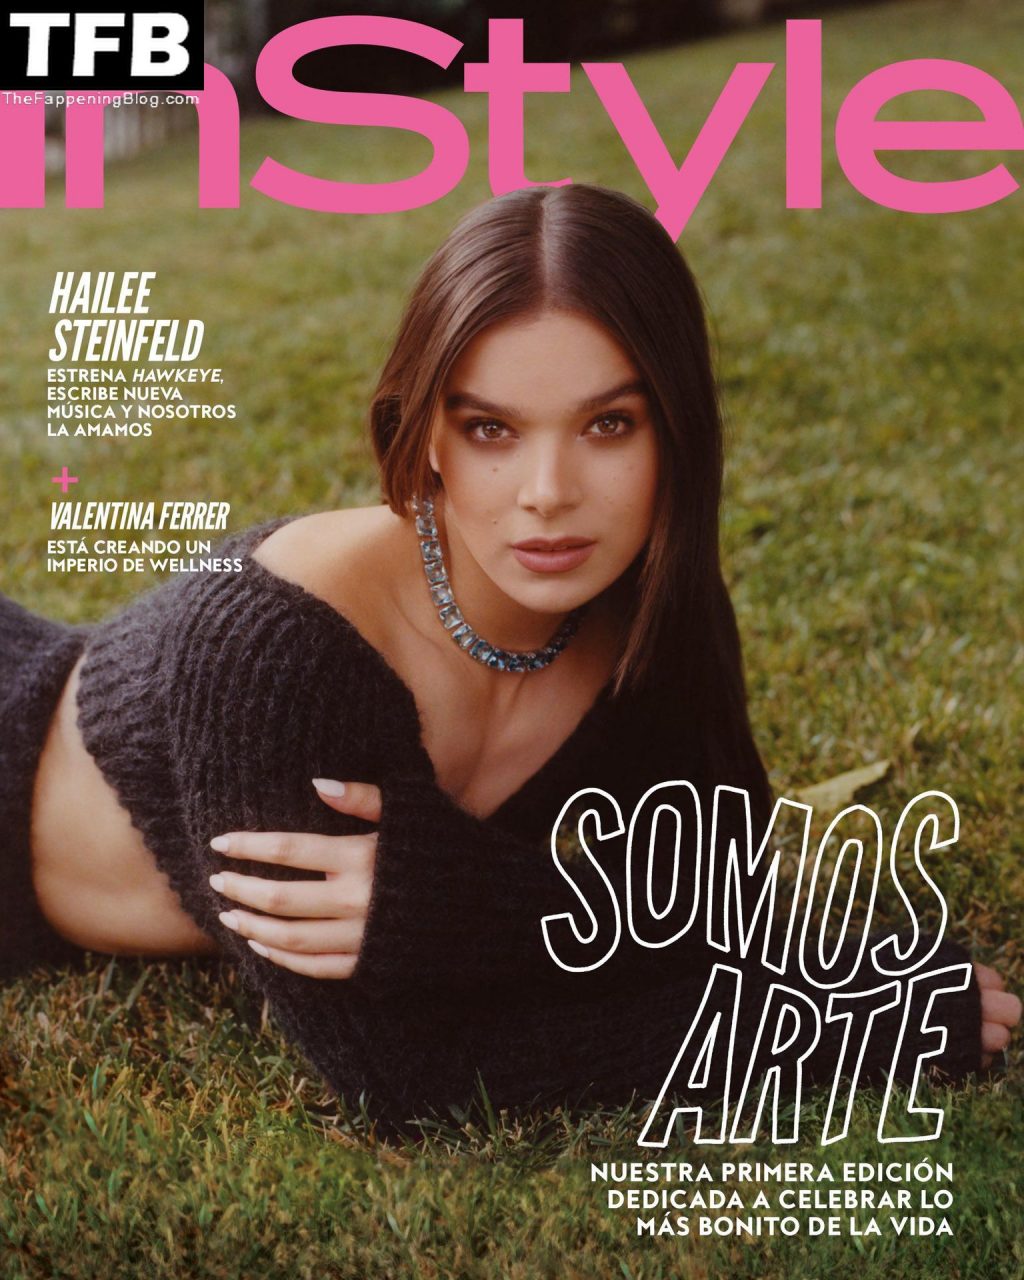 Hailee Steinfeld Shows Off Her Sexy Legs For InStyle Mexico Magazine November 2021 Issue (11 Photos)